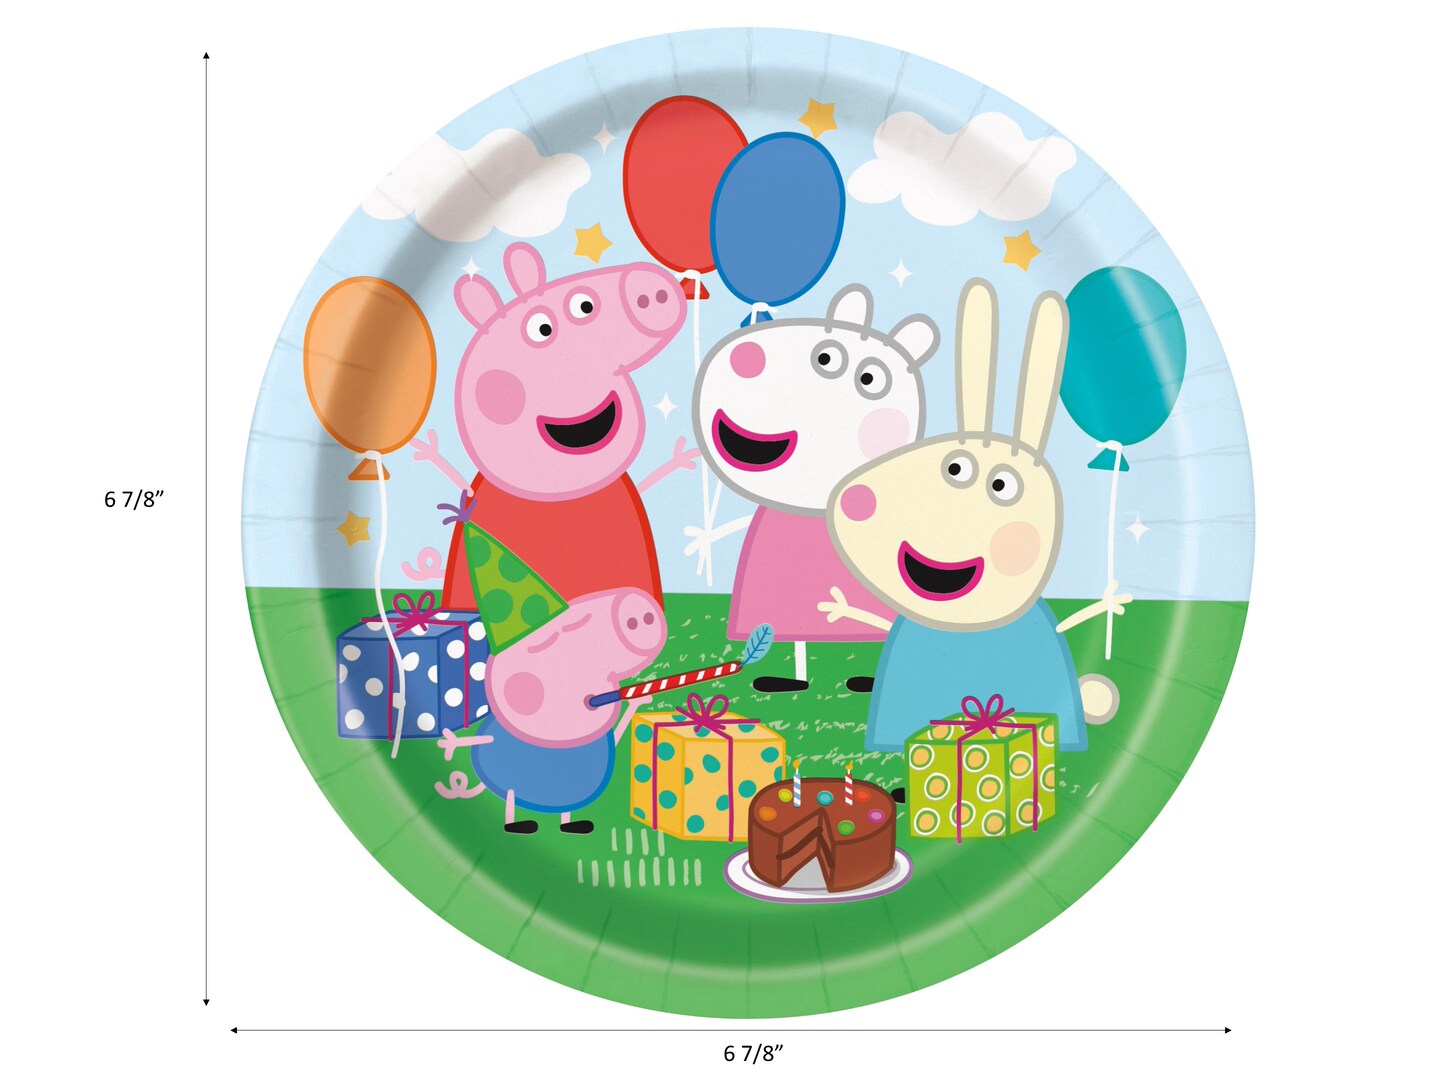 Peppa Pig Birthday Party Supplies Bundle with Cake Plates and Napkins for 16 Guests